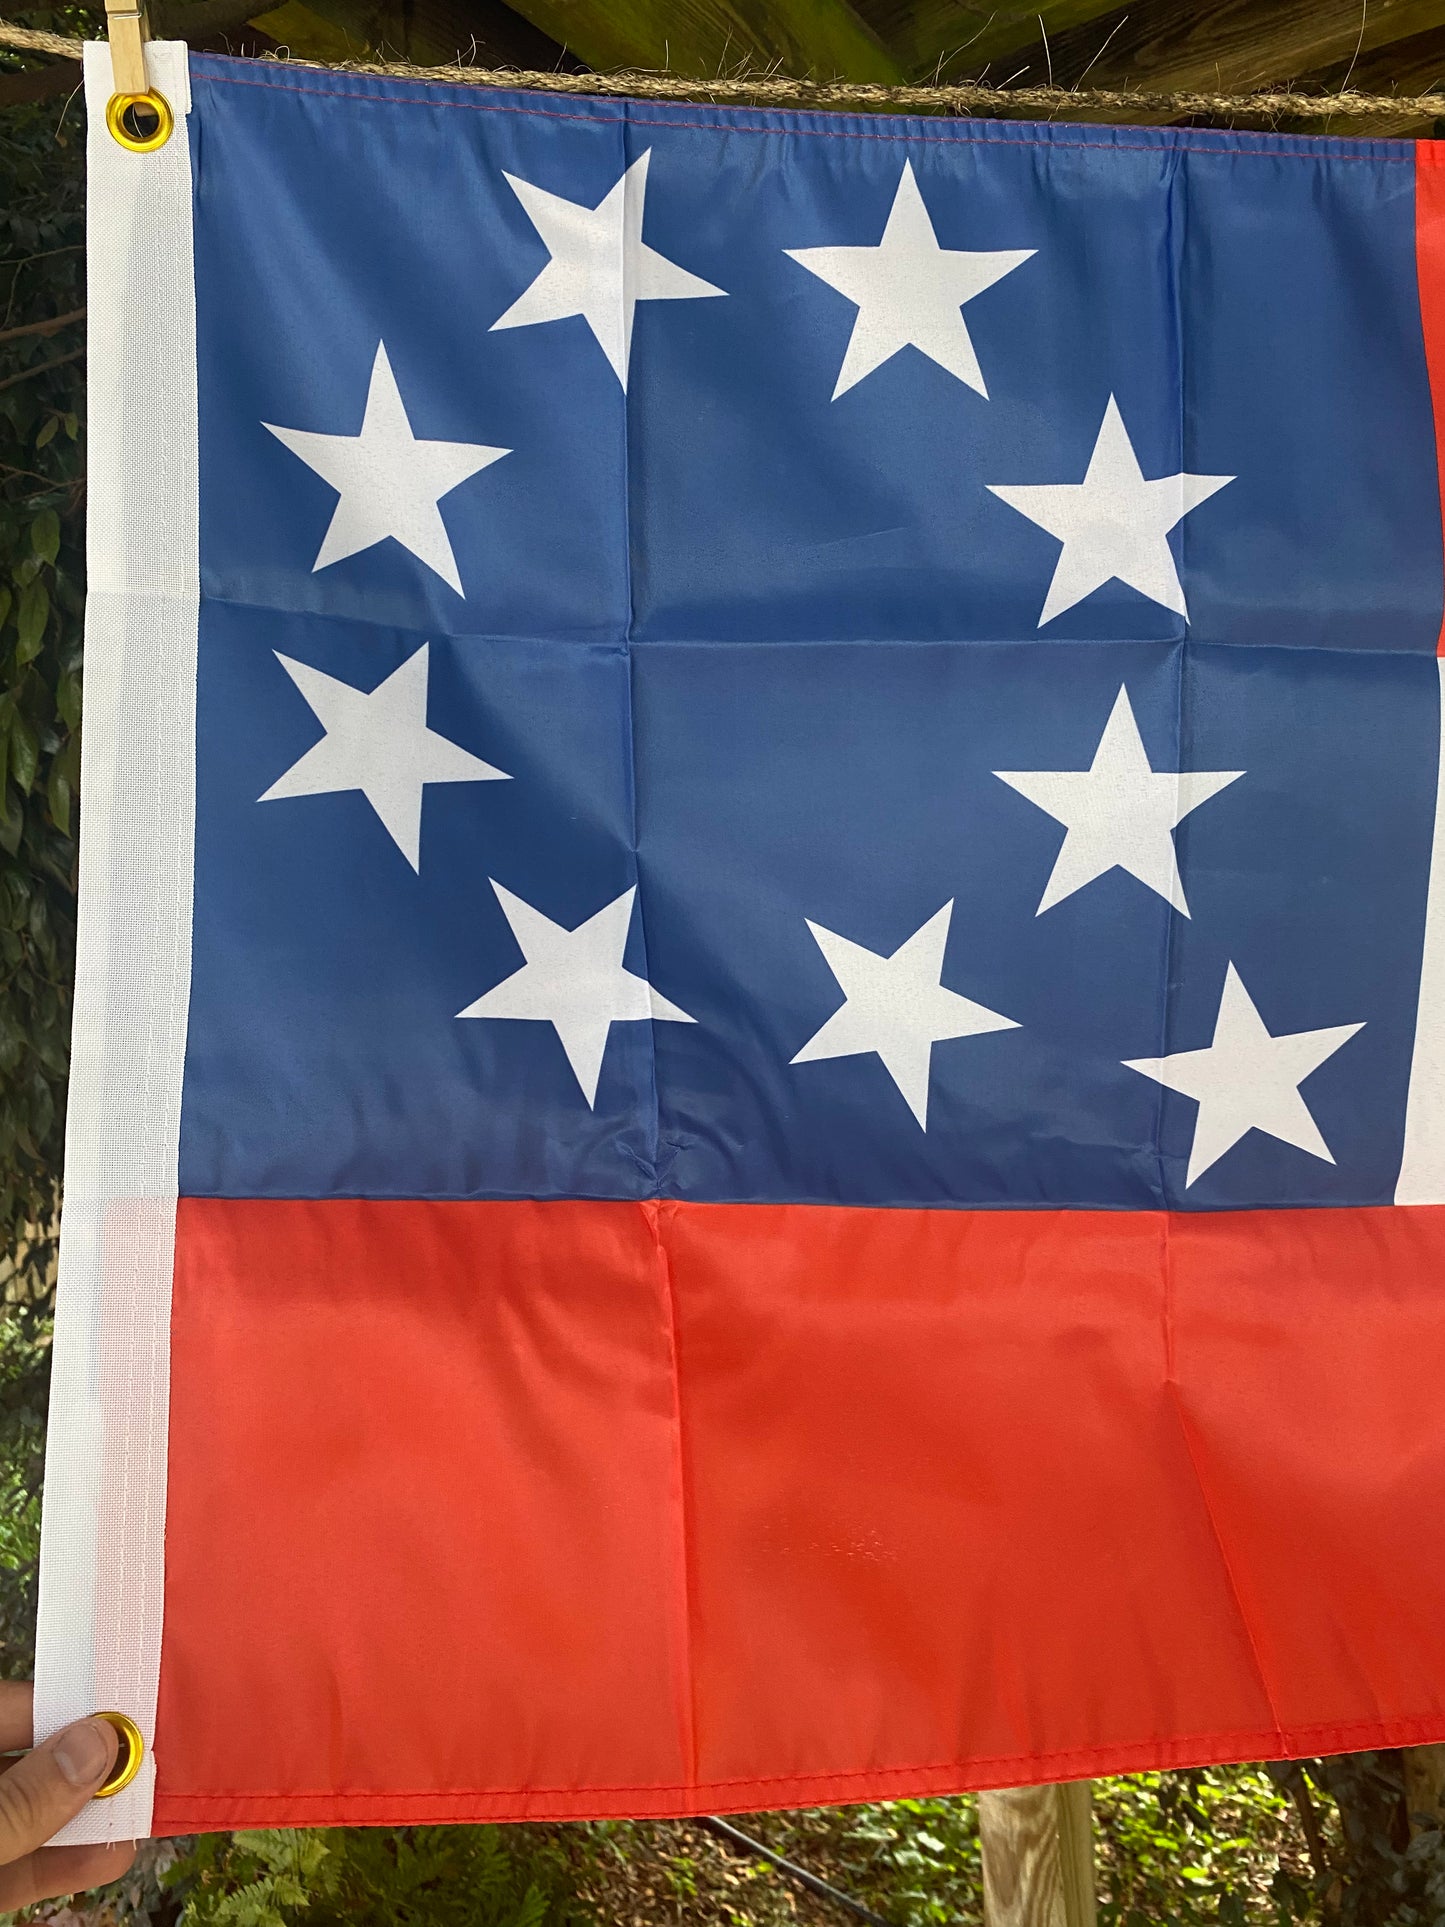 Rock City Guards Flag - First Regiment Tennessee Volunteers House Flag